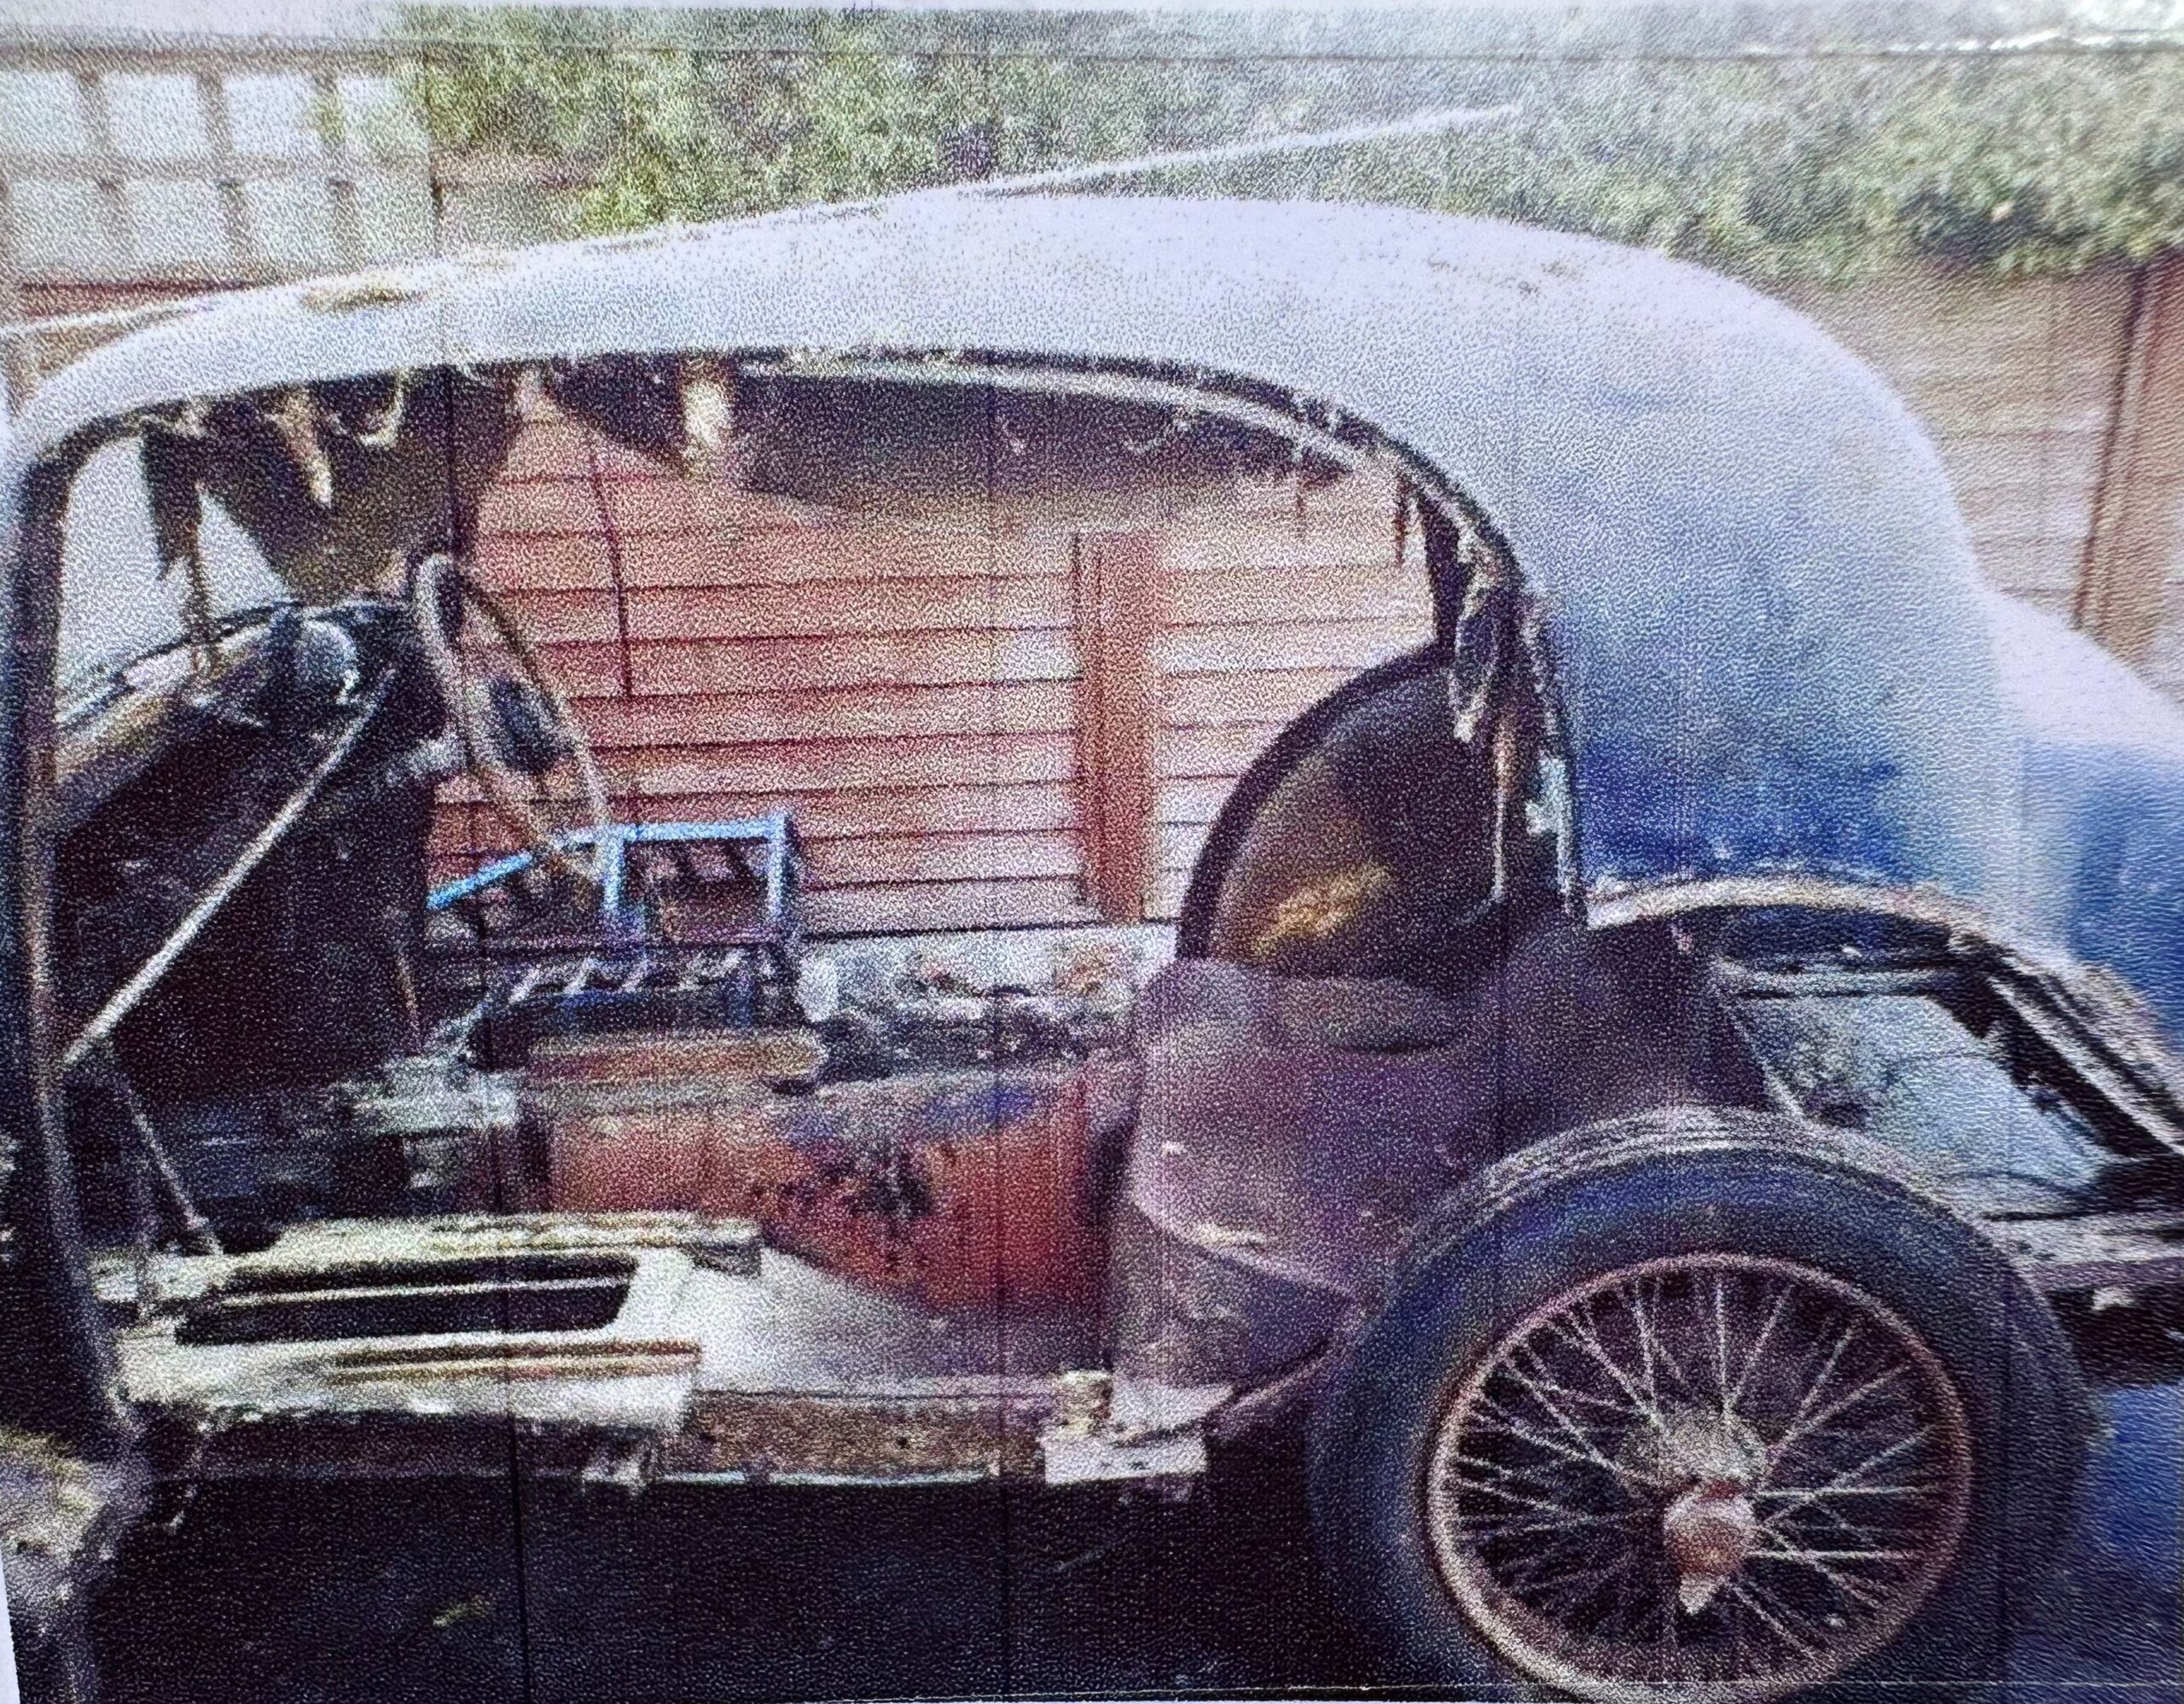 The classic MG VA sat in a garage for 45 years before the start of restoration work